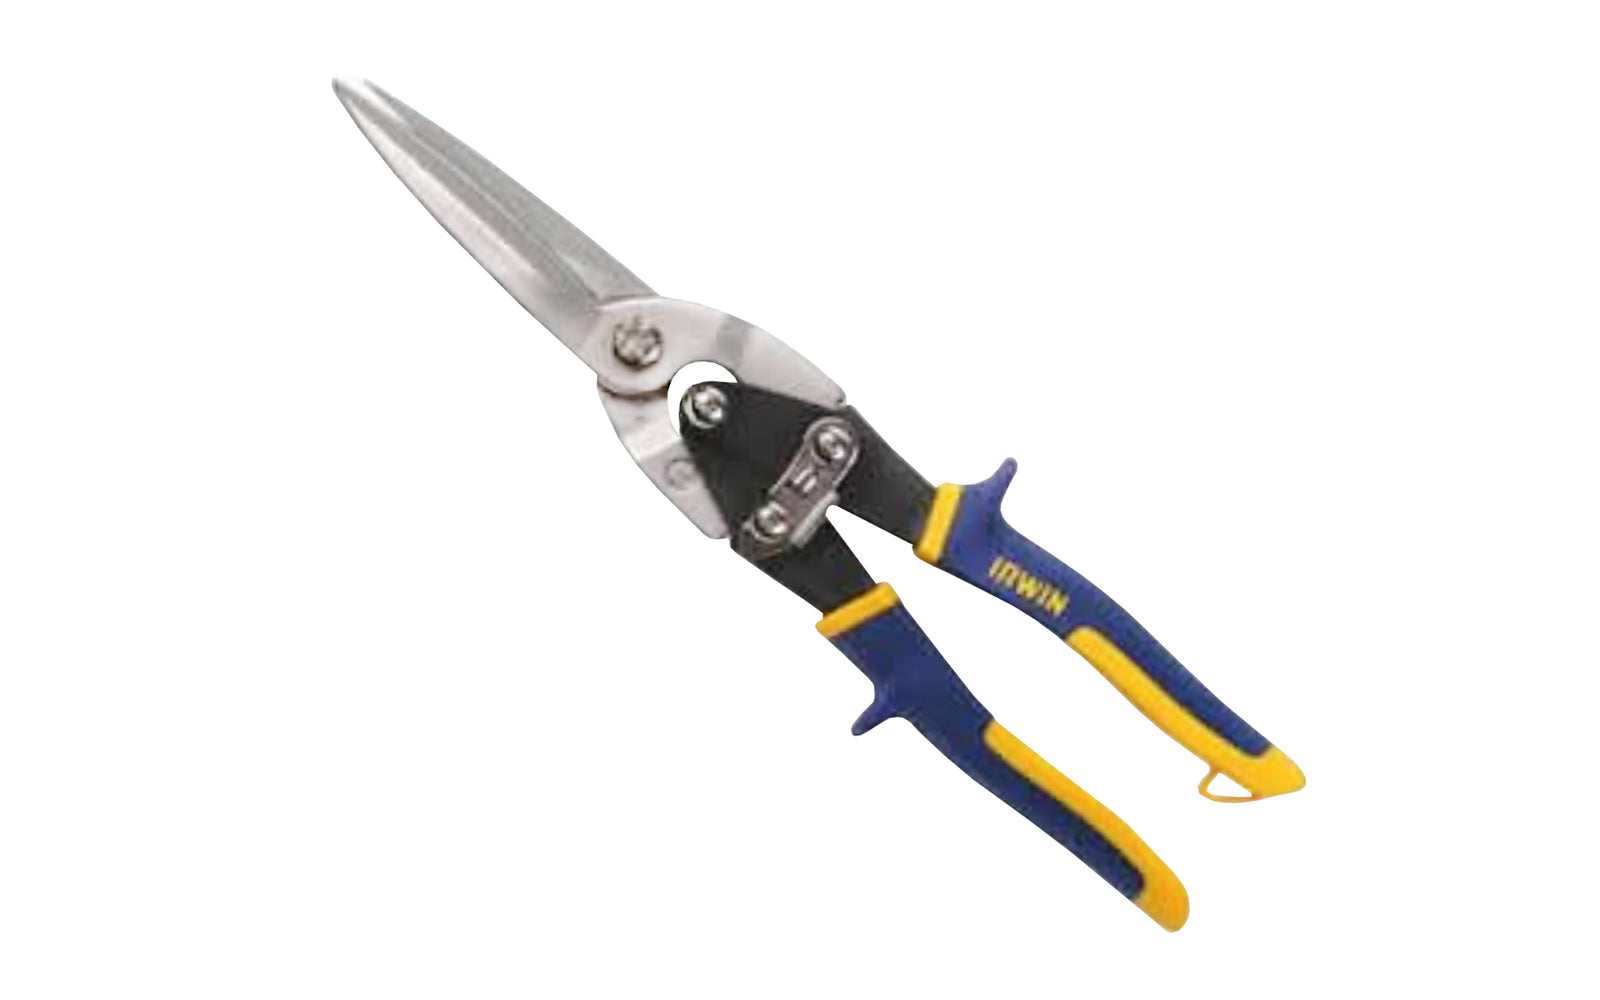 These Irwin 11-3/4" "ExtraCut" Multi-Purpose Snips with serrated blade are great for cutting sheet metal, vinyl, plastic, rubber & many other applications. Compound cutting action with textured grips & E-Z close latch. The handle grips provide superior comfort & resist twisting. Model 21304. Tin Snips. 038548213040